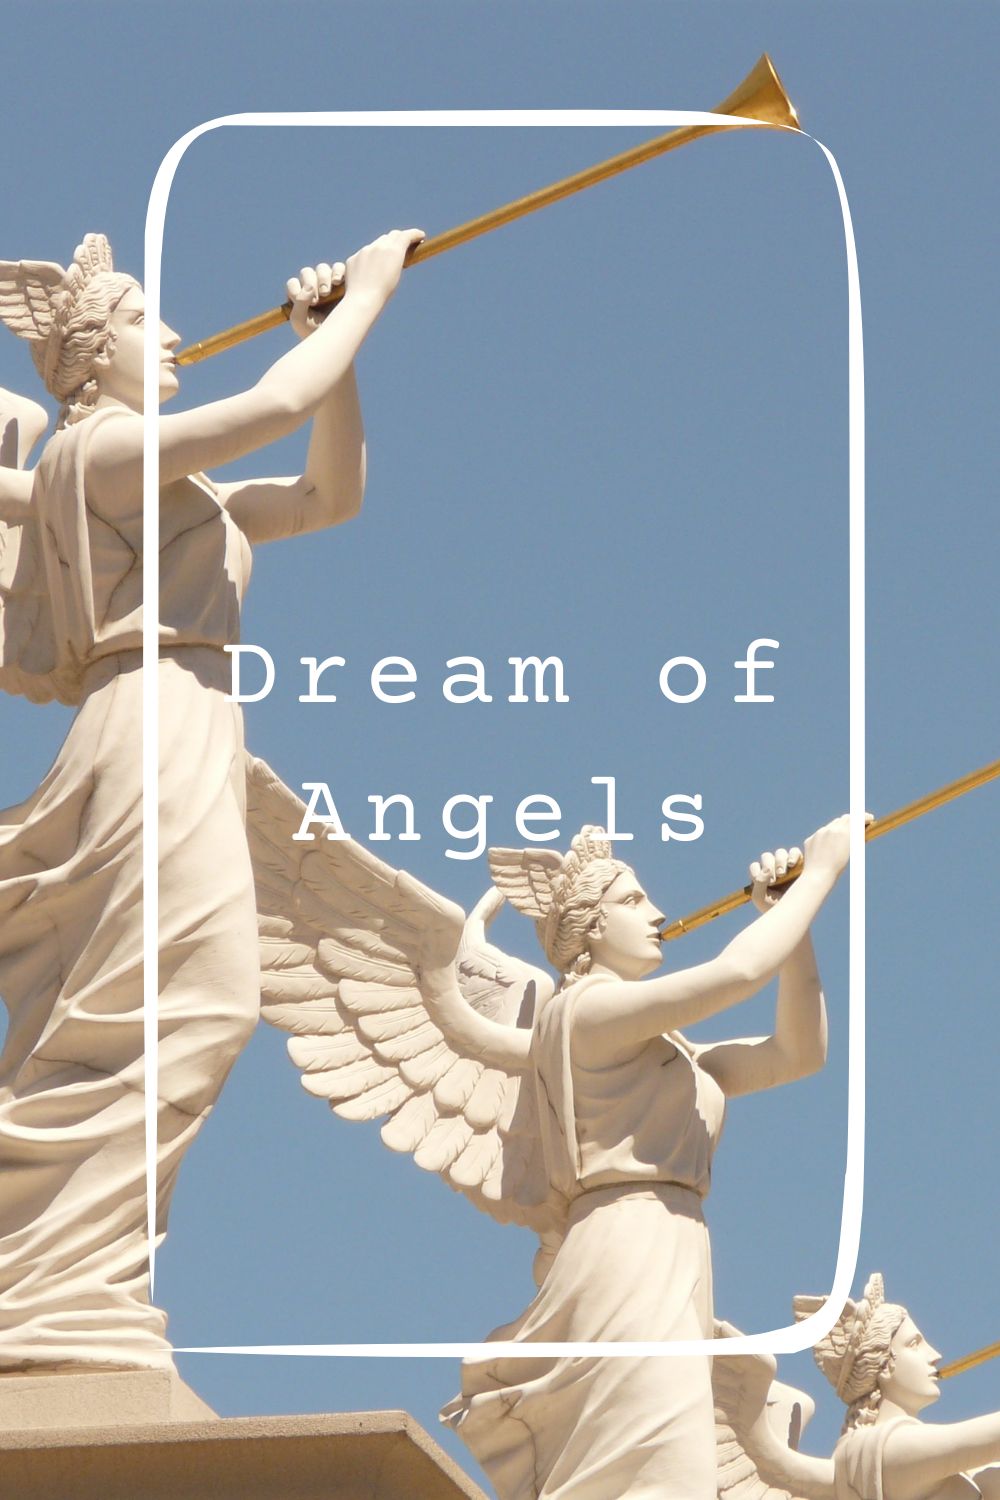 8 Dream of Angels Meanings1